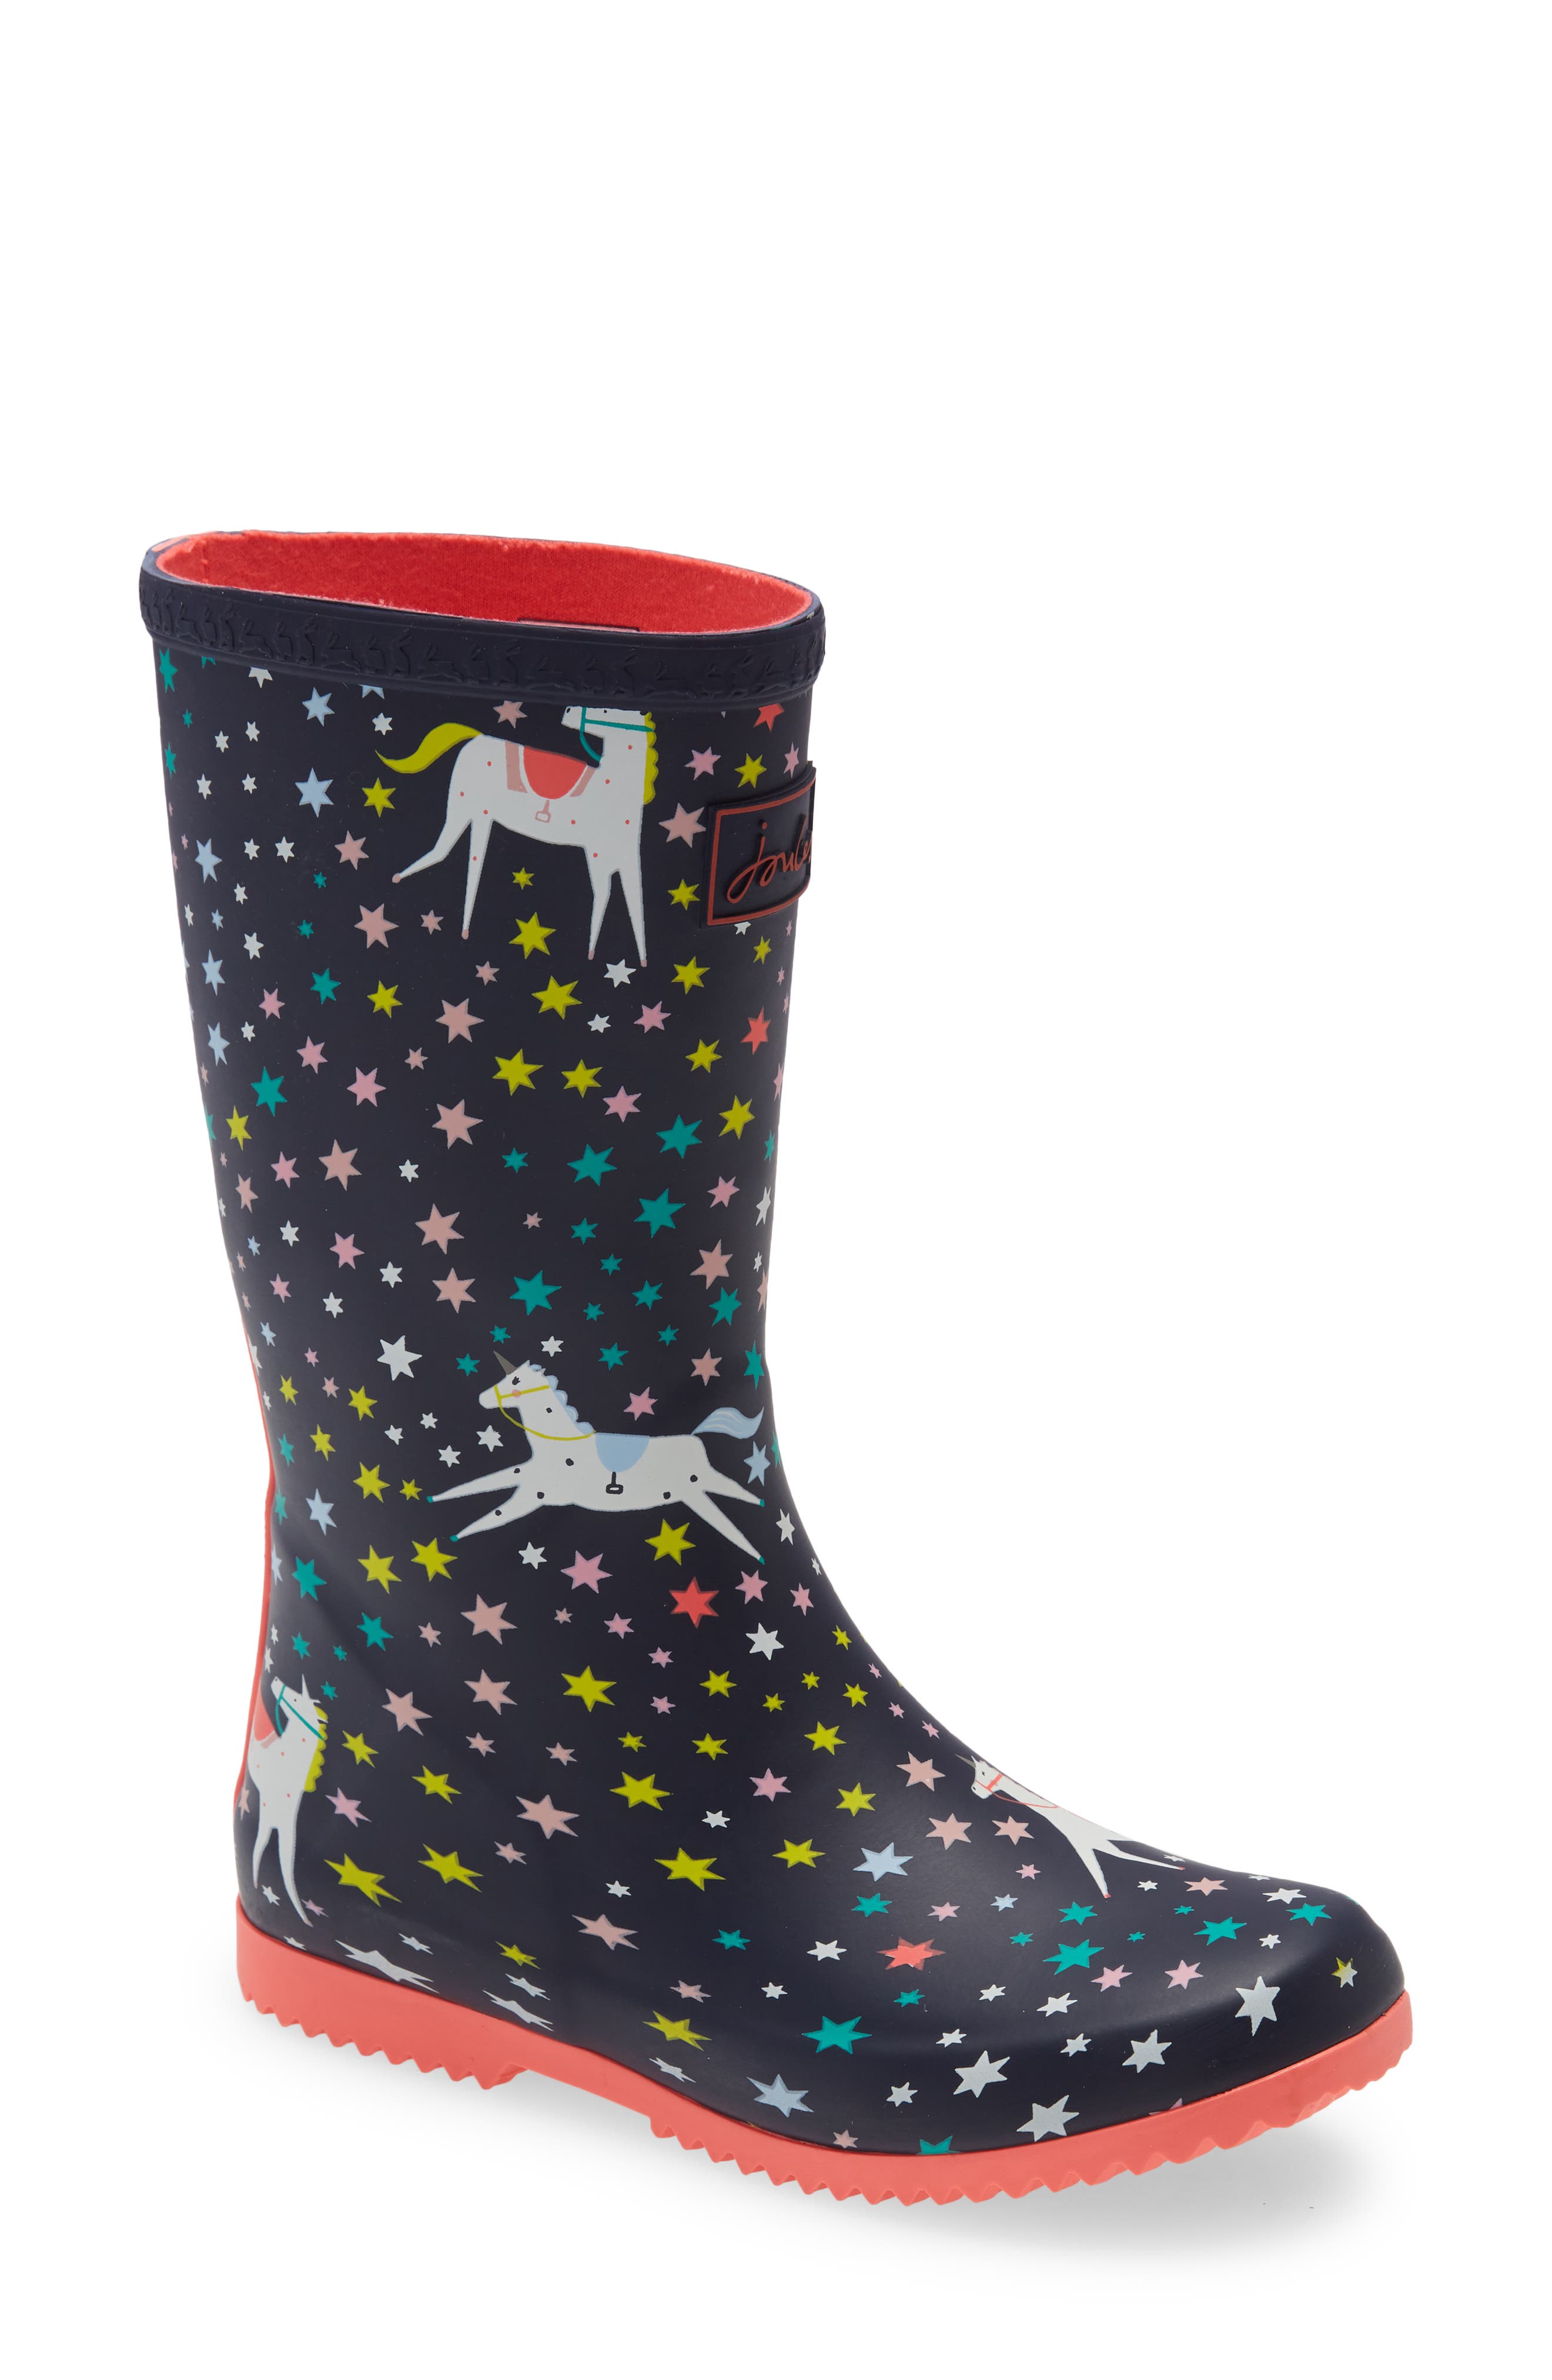 Joules JNR Roll Up Welly Rain Boot Pink Horses 13 M US Little Kid